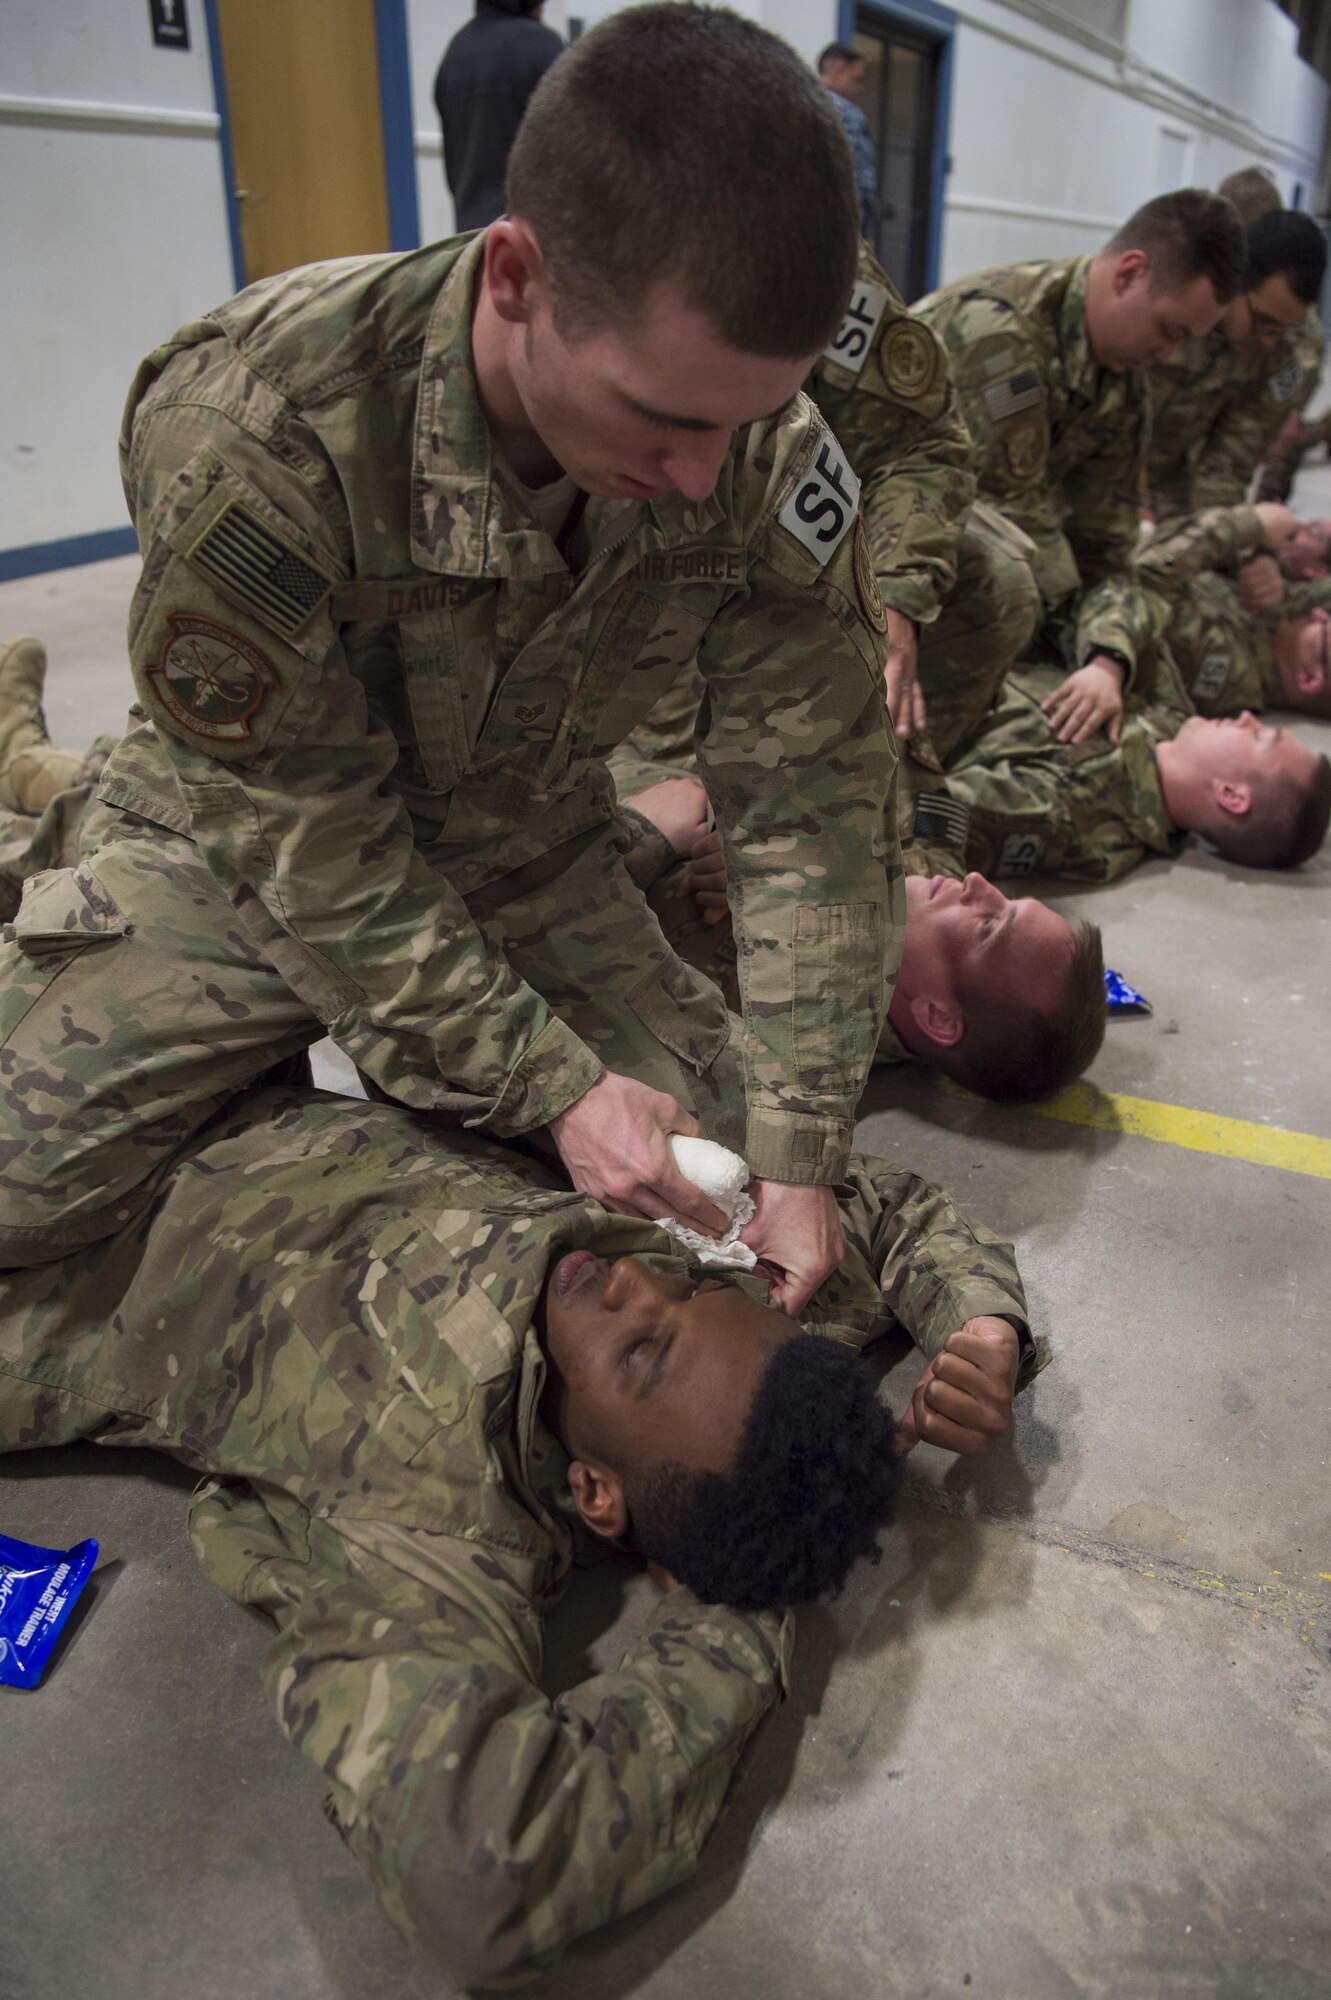 Staff Sgt. Aaron Davis, 790th Missile Security Forces Squadron member, applies combat gauze to Airman 1st Class Daquan Zackery, 790th Missile Security Forces Squadron member during a Trauma Casualty Care Course on F.E. Warren Air Force Base, Wyo., March 3, 2017. Members in the course had to display proper use of all the lifesaving skills taught and score 70 percent or above to pass the course. The Defense Medical Readiness Training Institute hosted the course. DMTRI is a tri-service organization that offers both resident and non-resident joint medical readiness training courses across the military. (U.S. Air Force photo by Staff Sgt. Christopher Ruano)